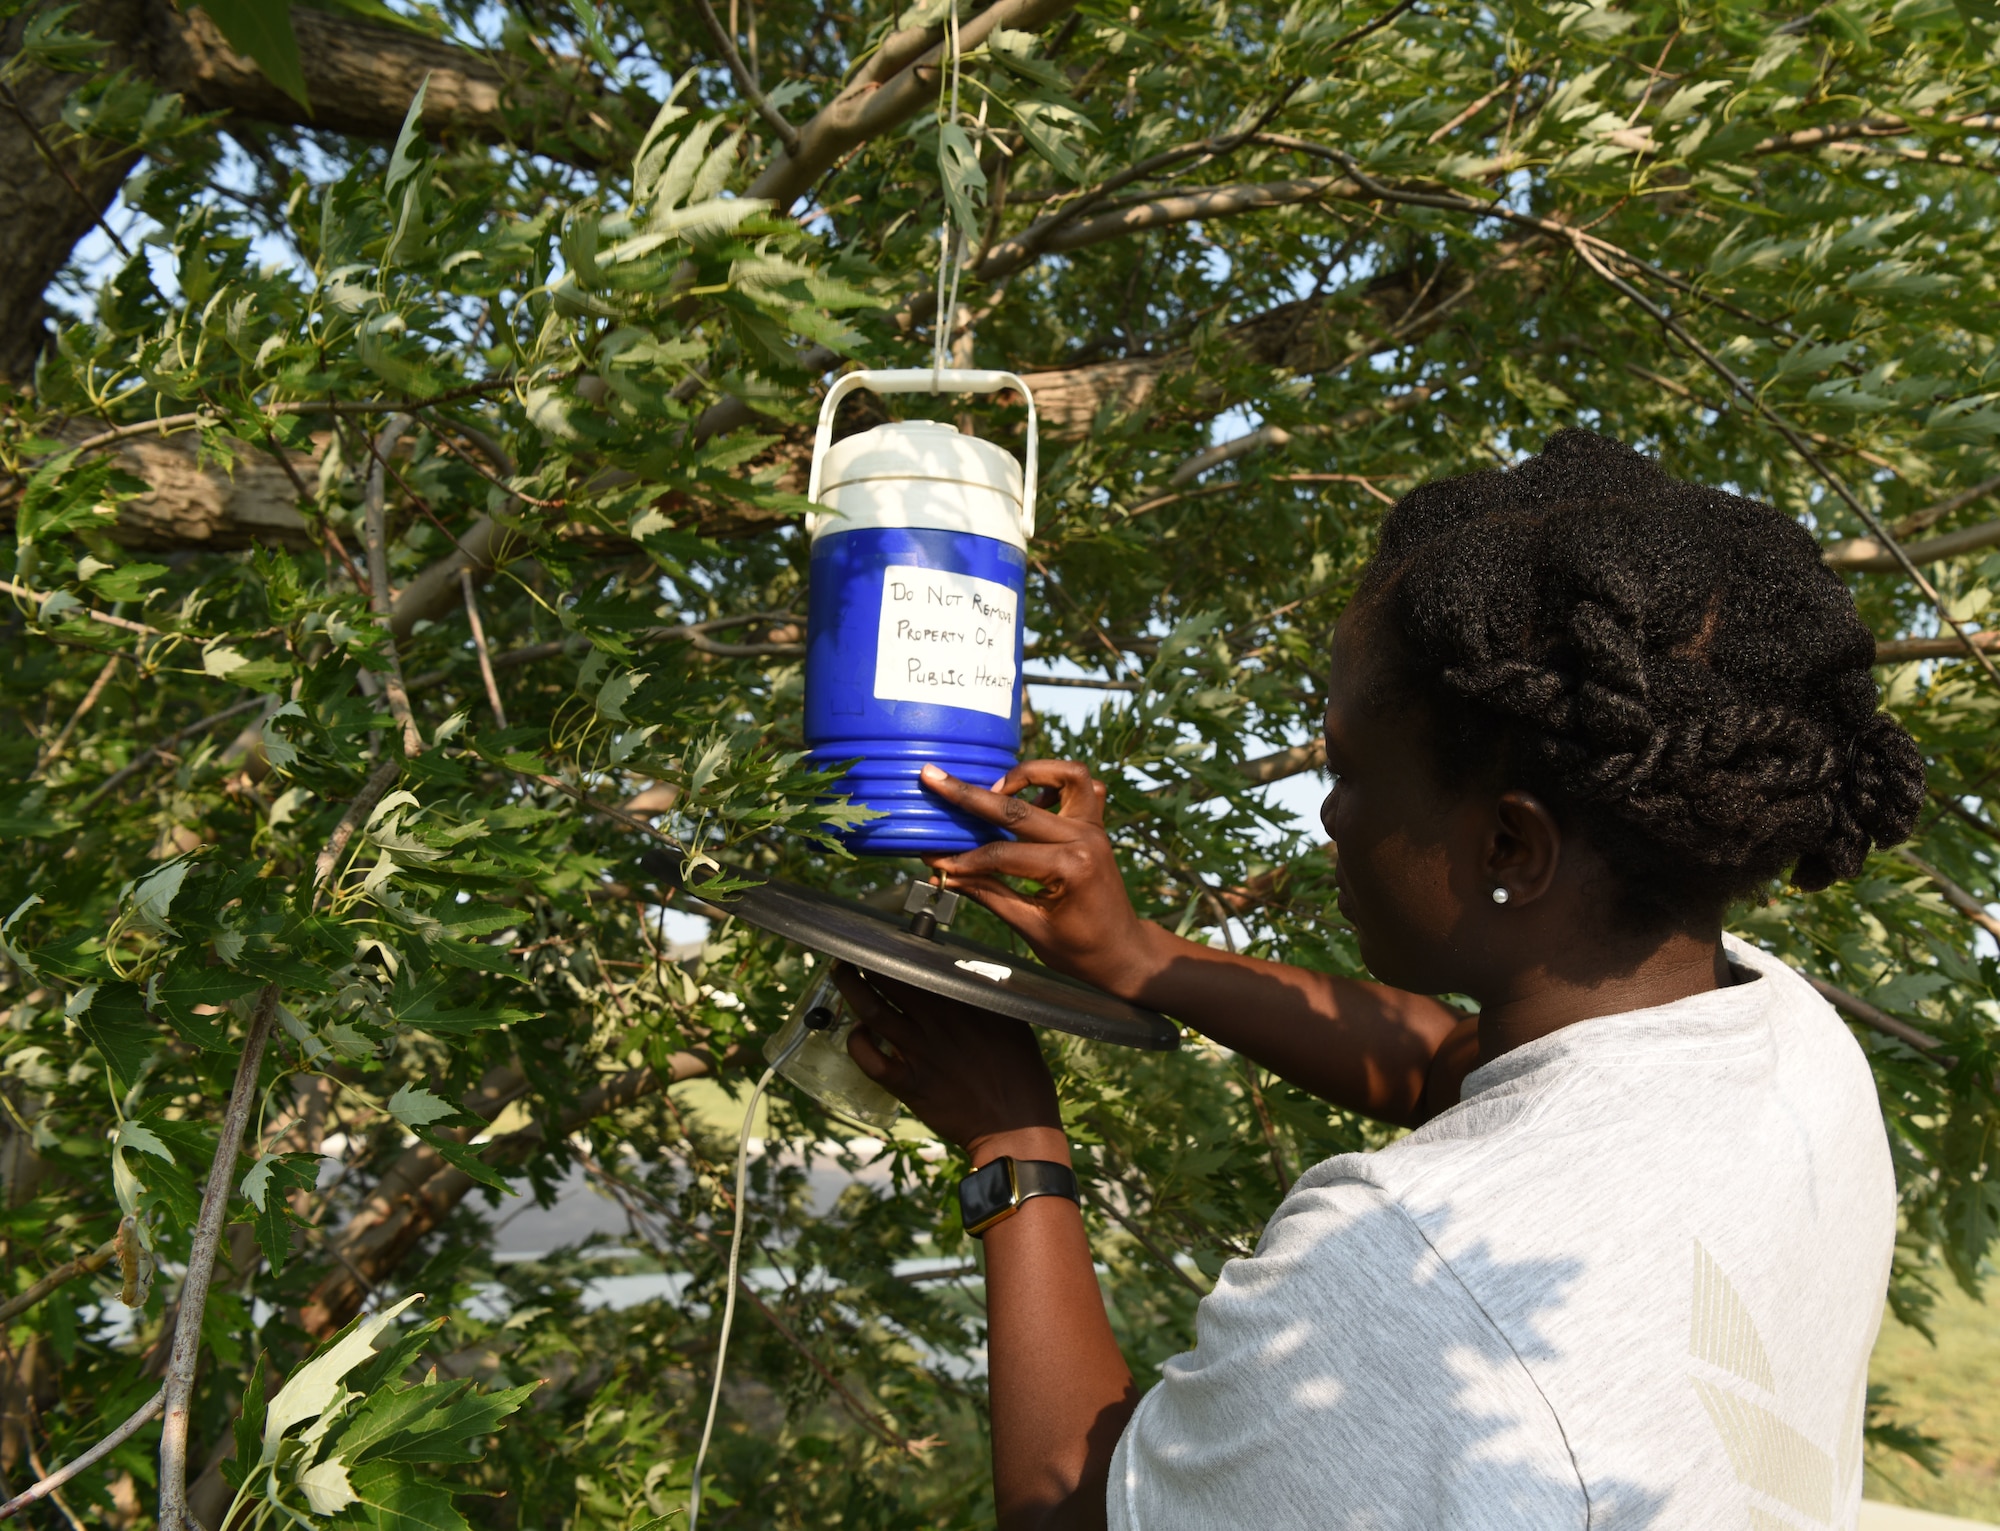 Airman 1st Class Georgette Ndamukong, a 28th Medical Group public health technician, sets up a mosquito trap at Ellsworth Air Force Base, S.D., Aug. 13, 2018. Public health members capture mosquitoes on a continuous basis to be sent off and tested for diseases, such as the West Nile virus. (U.S. Air Force photo by Airman 1st Class Thomas Karol)